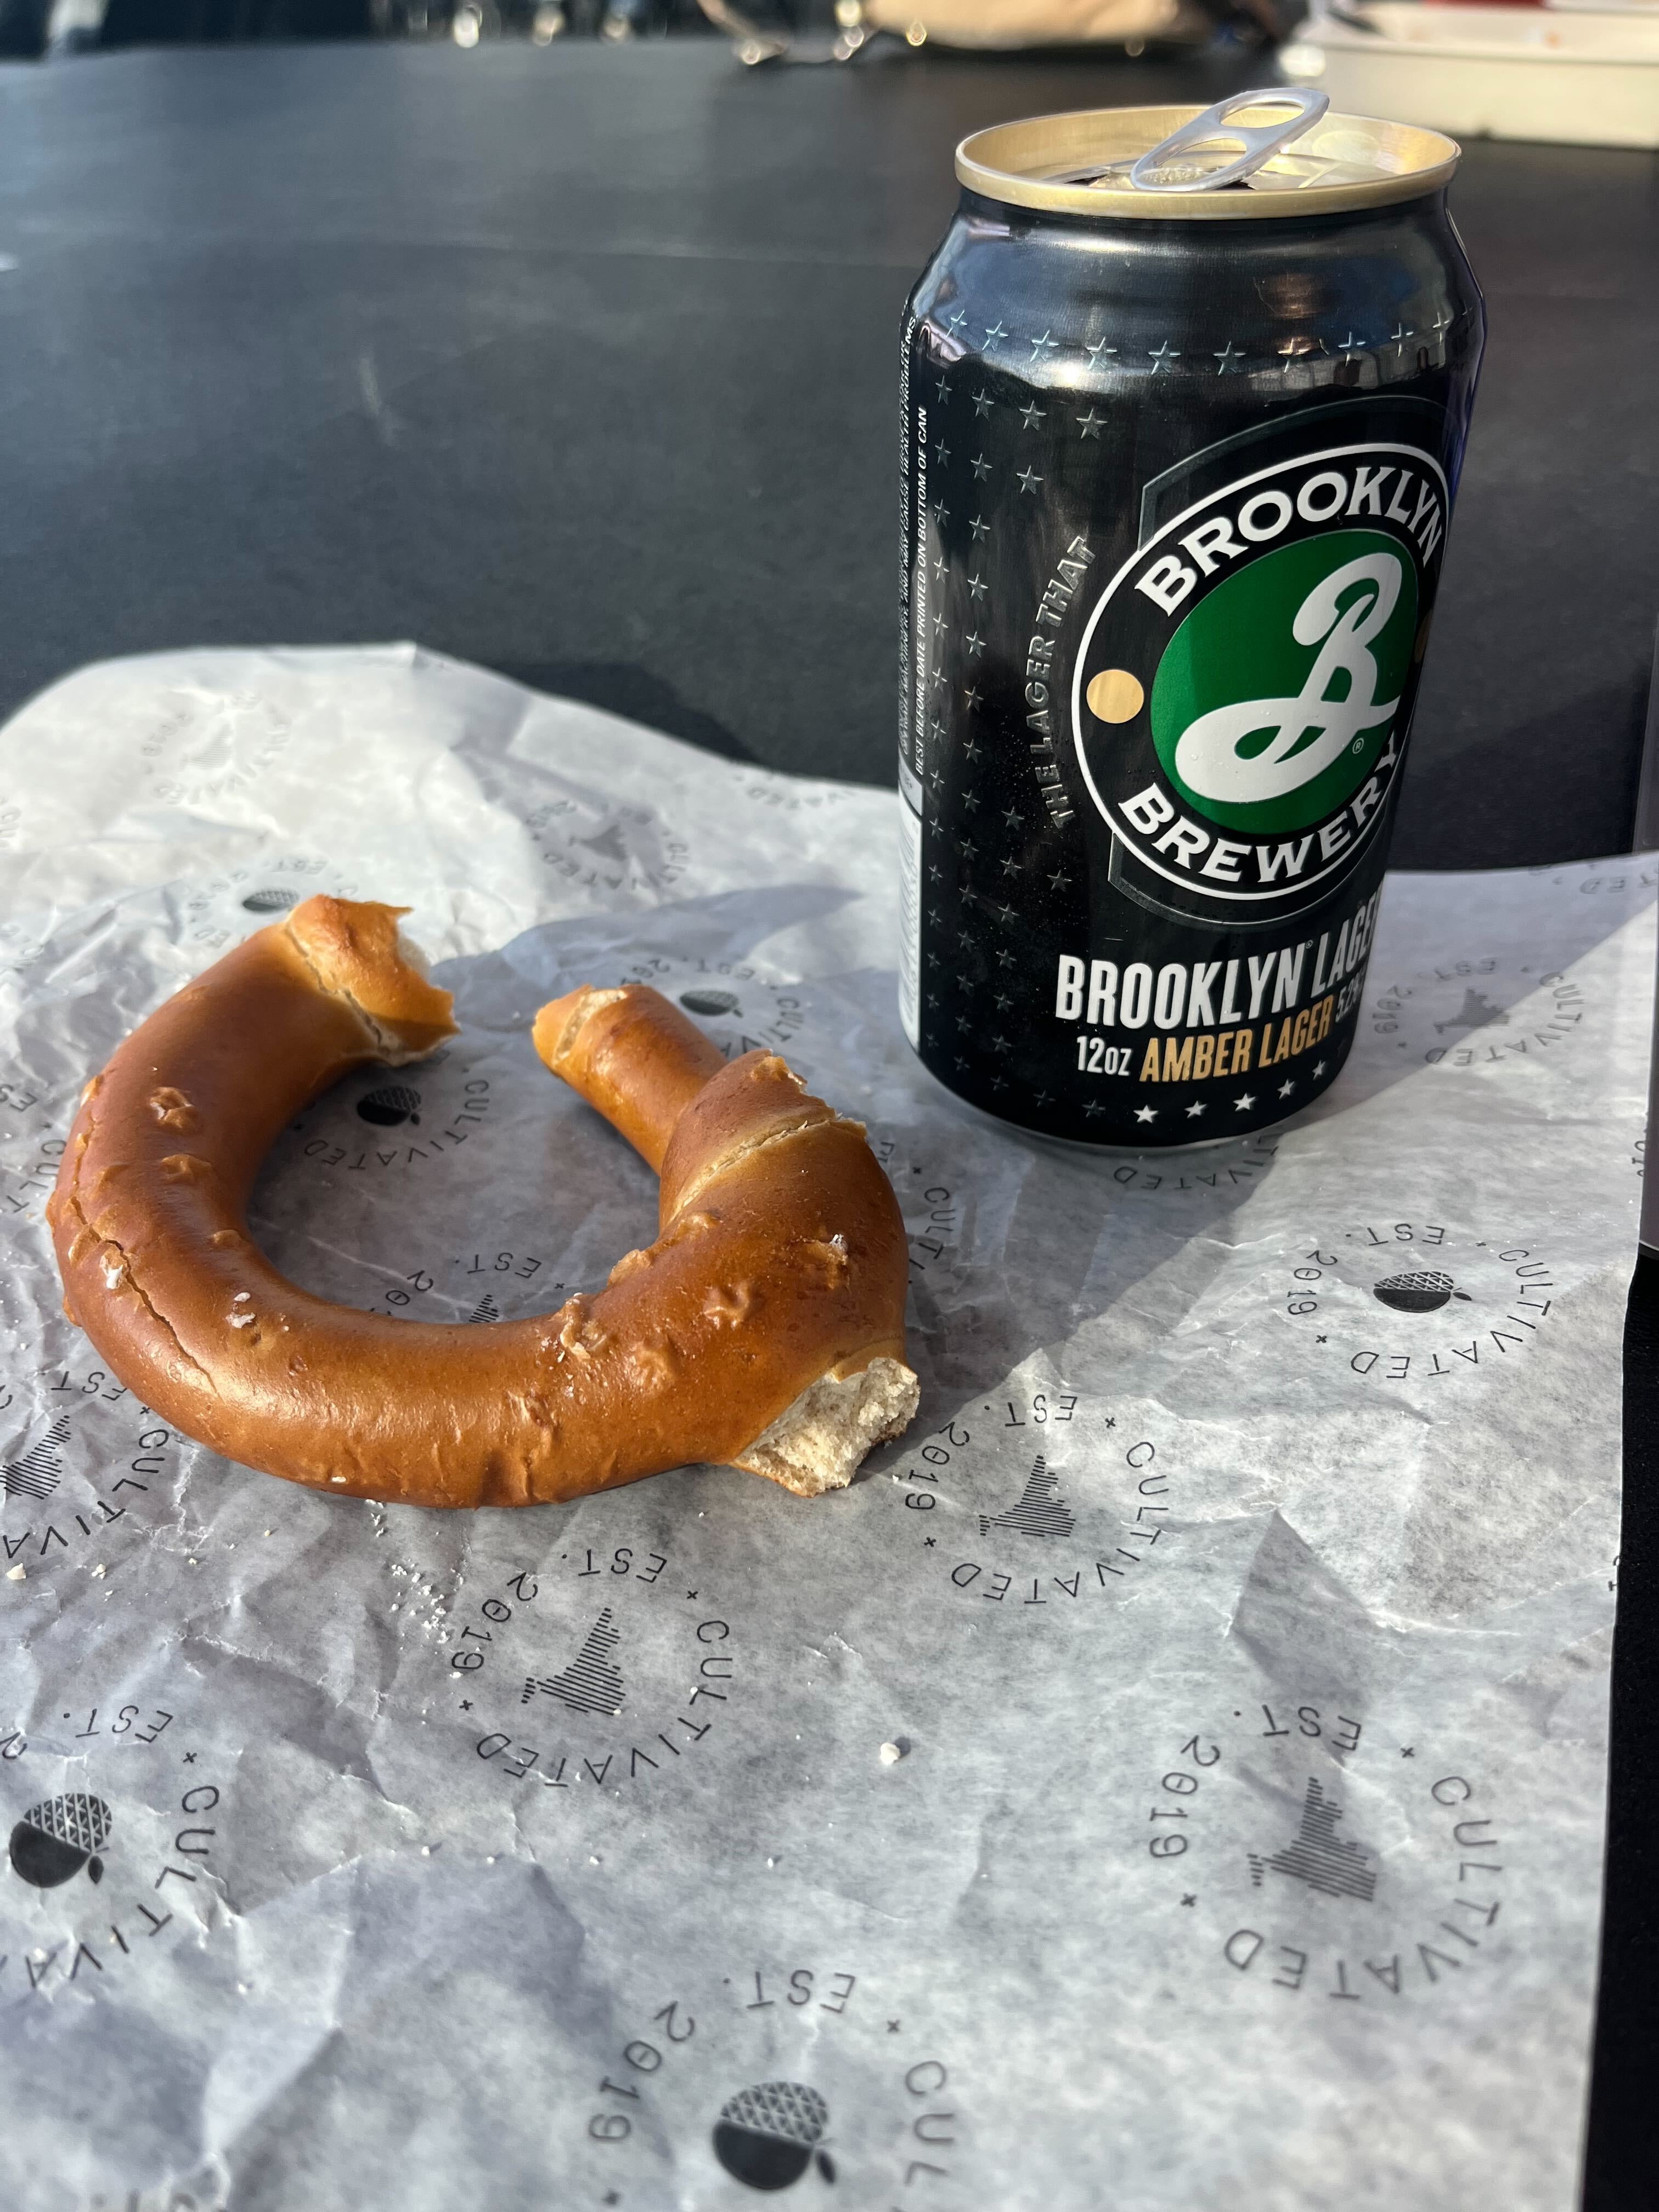 A nice pretzel and beer to finish it all off. 